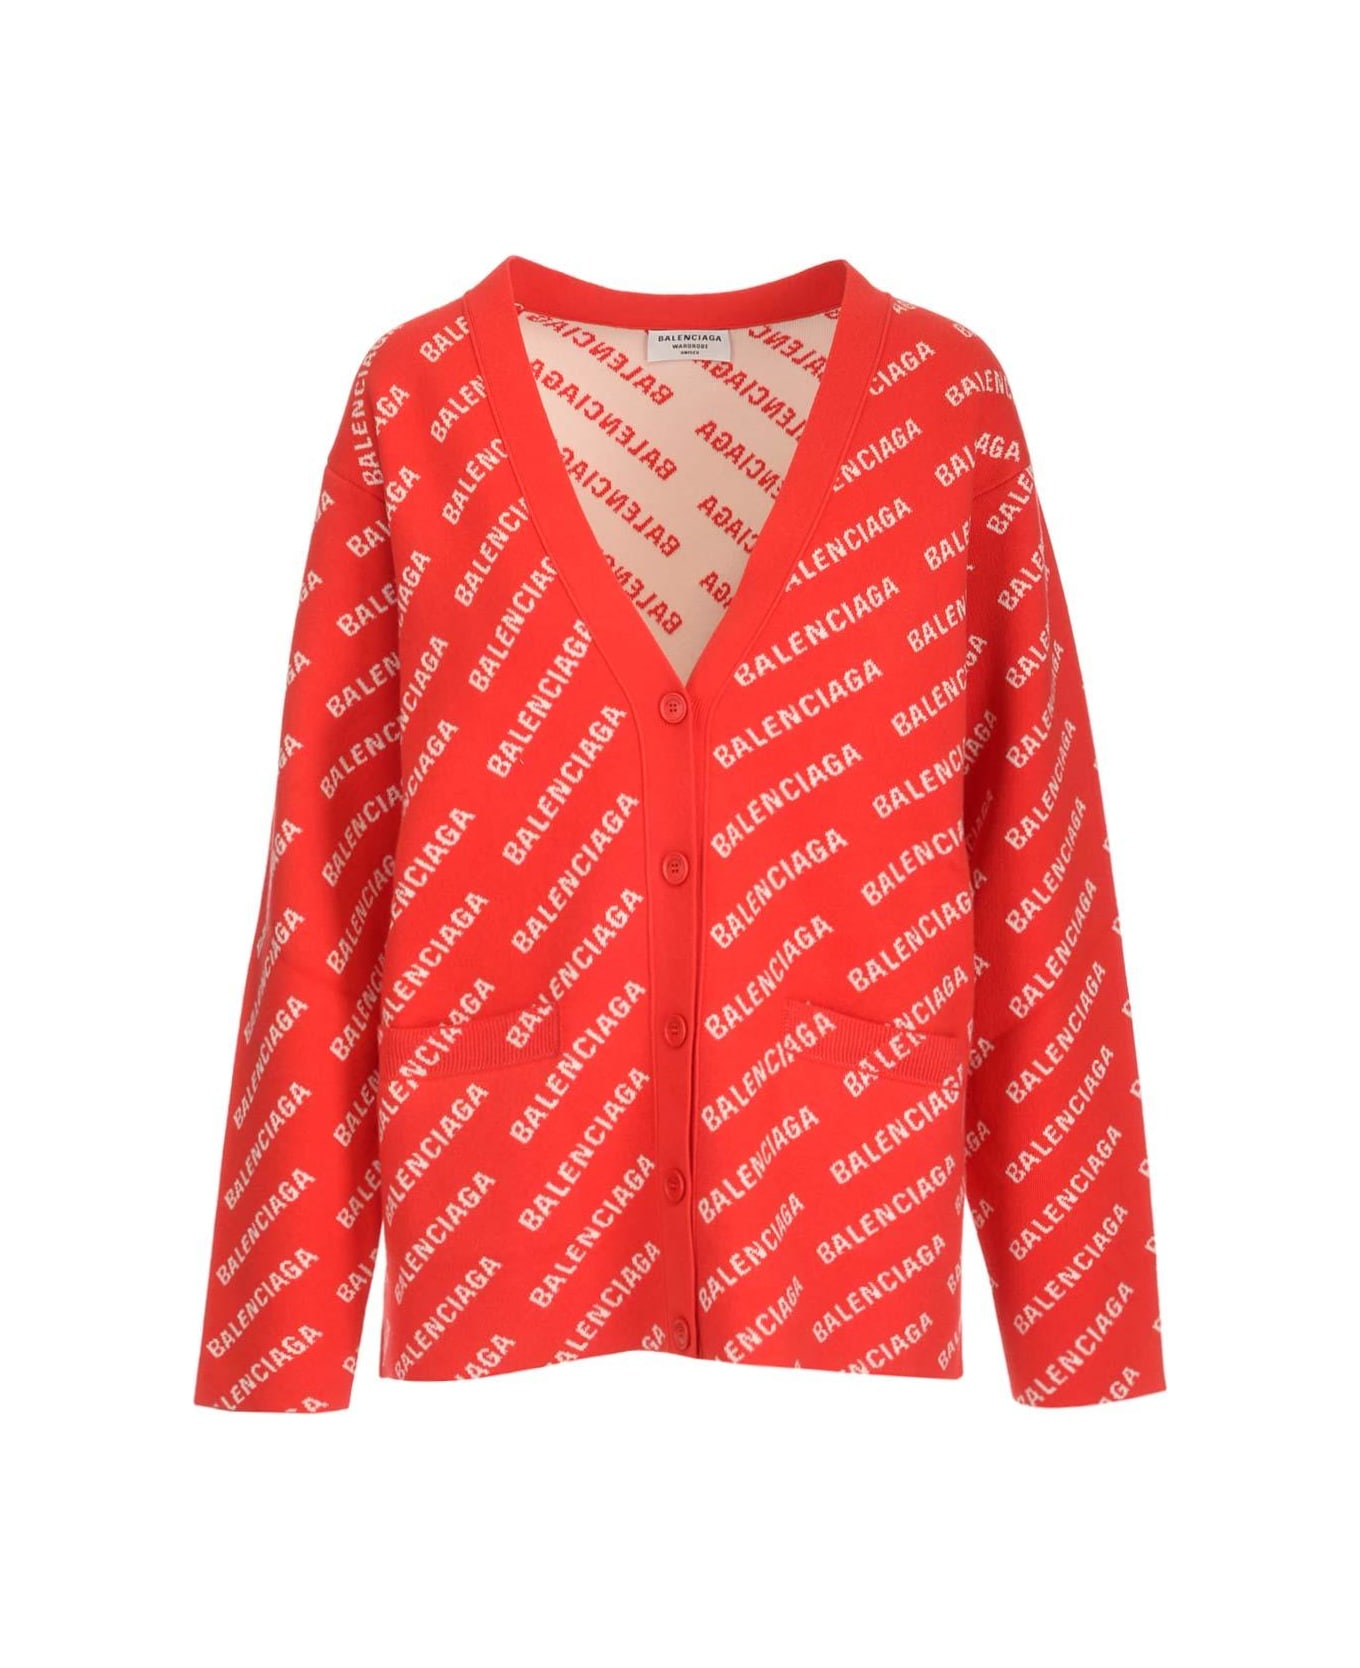 Balenciaga All Over Logo Printed Knitted Cardigan - RED WHITE